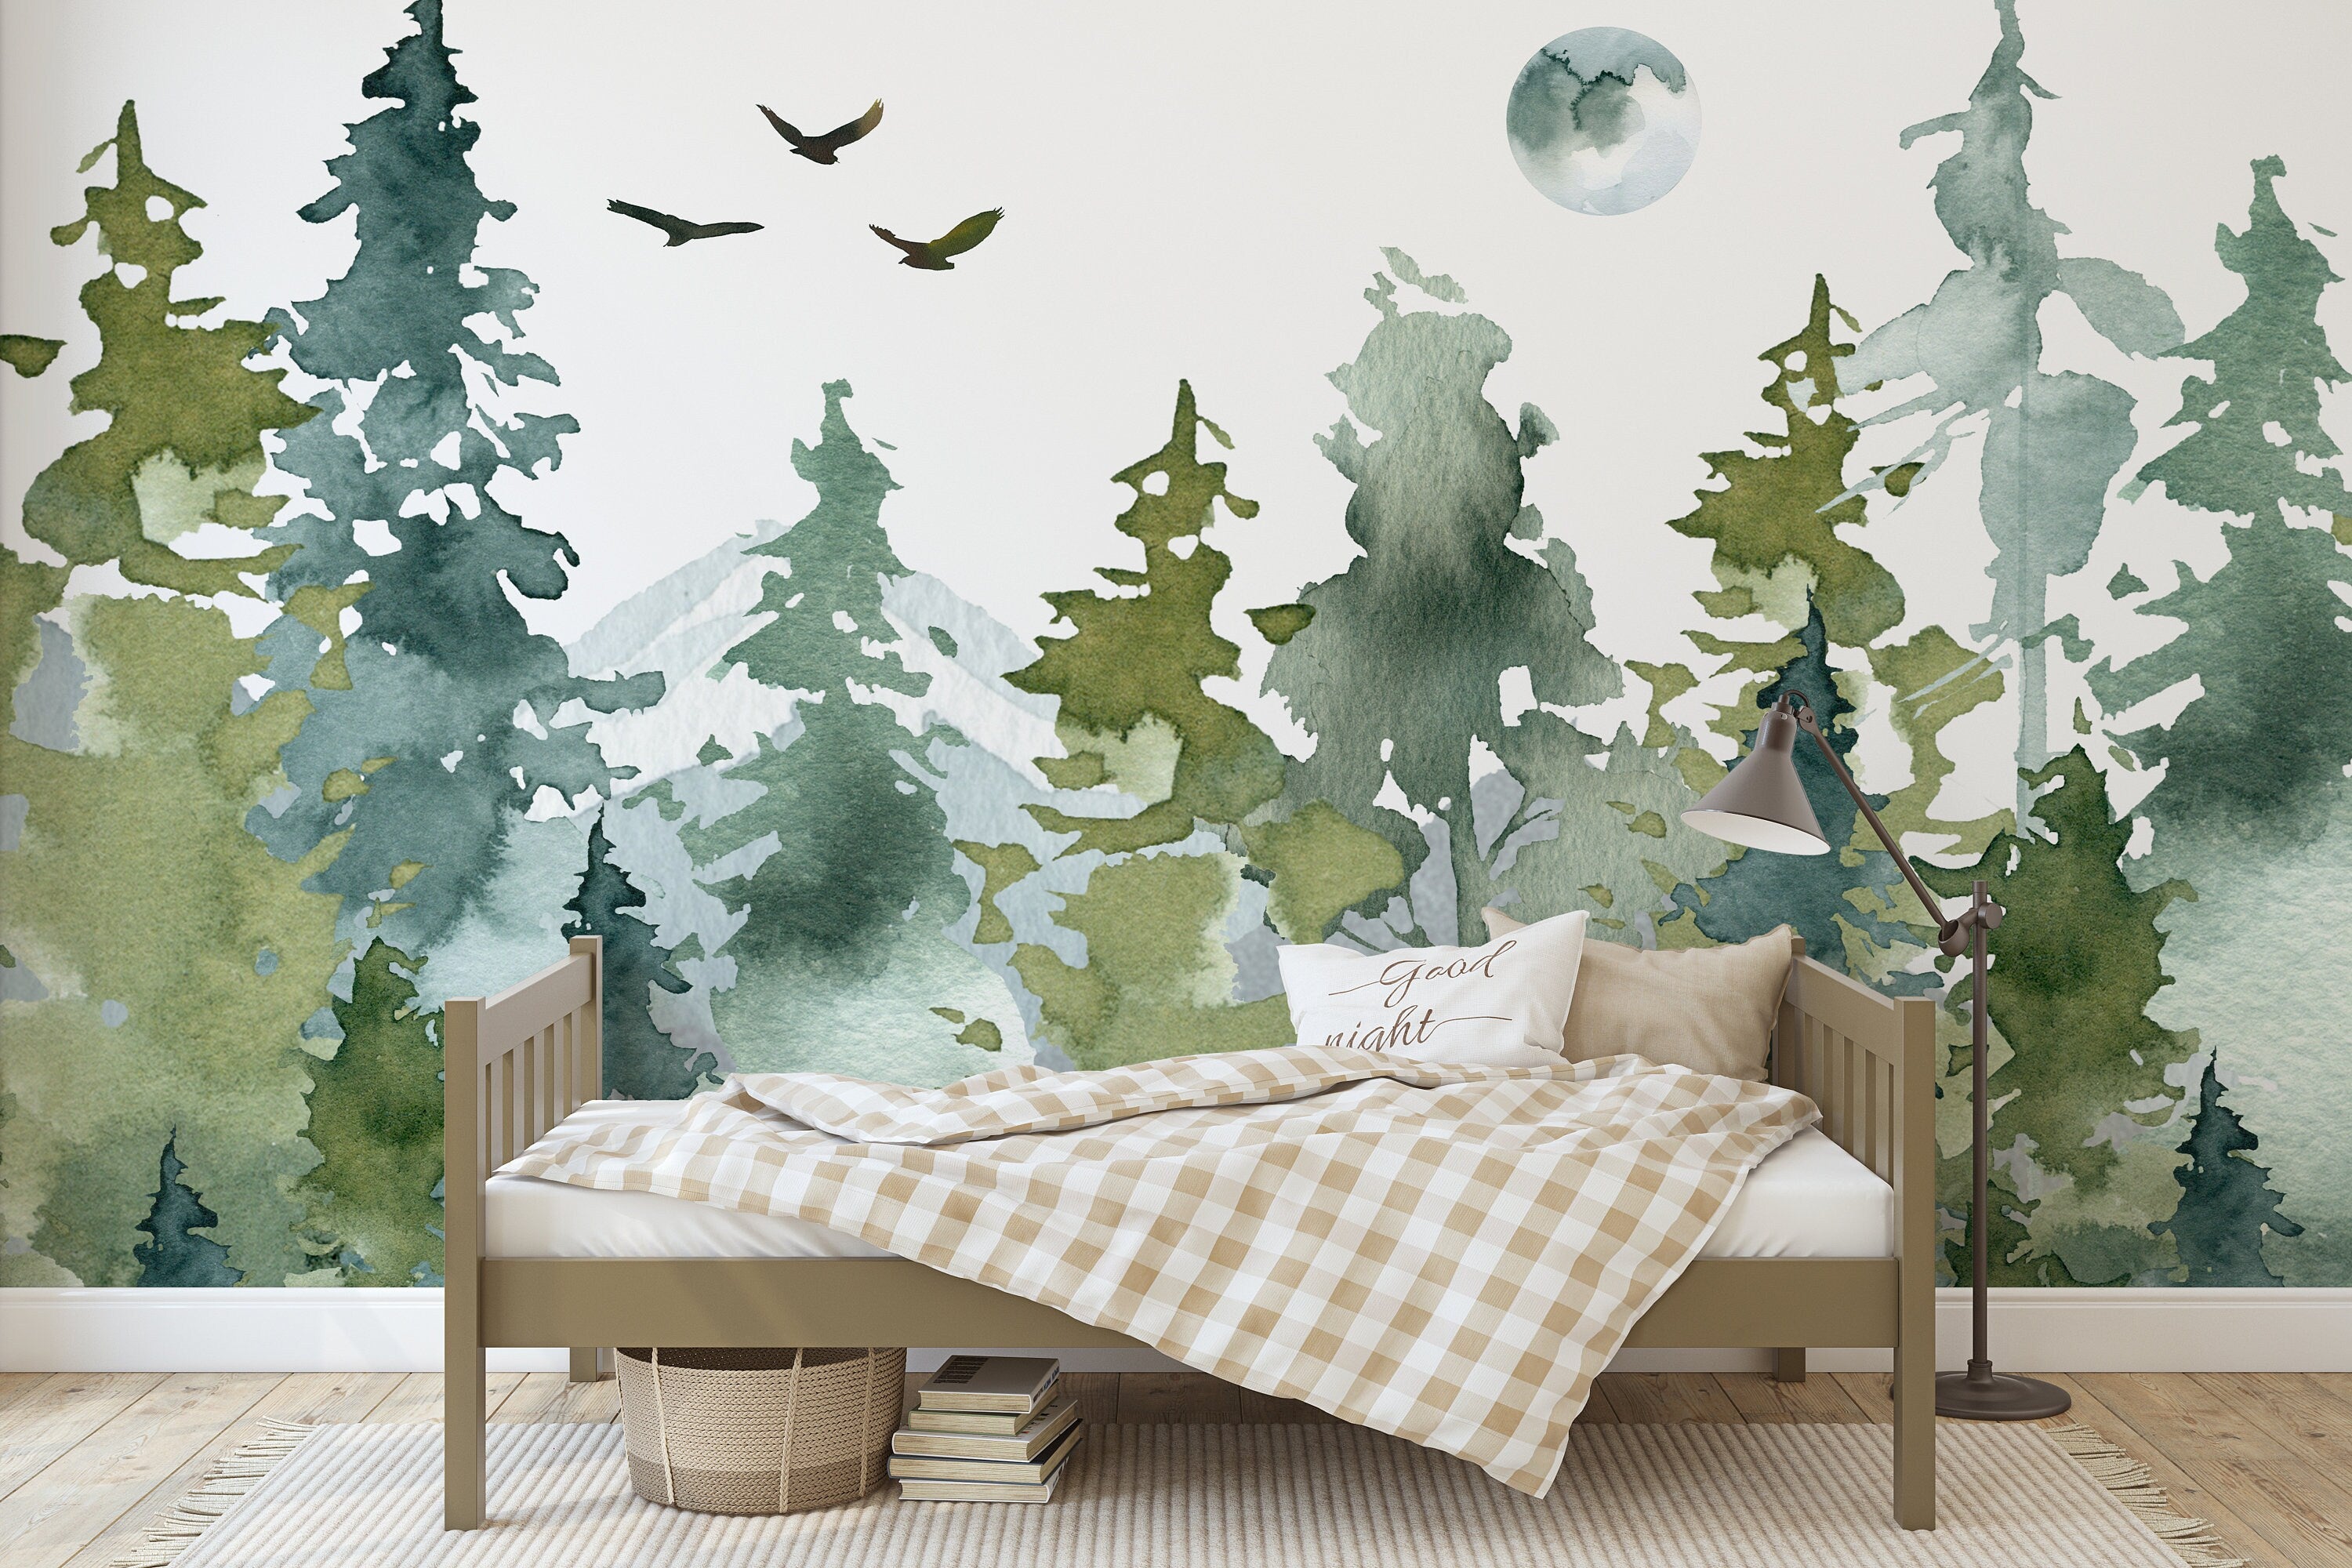 Removable Wallpaper Woodland Nursery Wallpaper Peel and Stick Forest W   Scandi Home